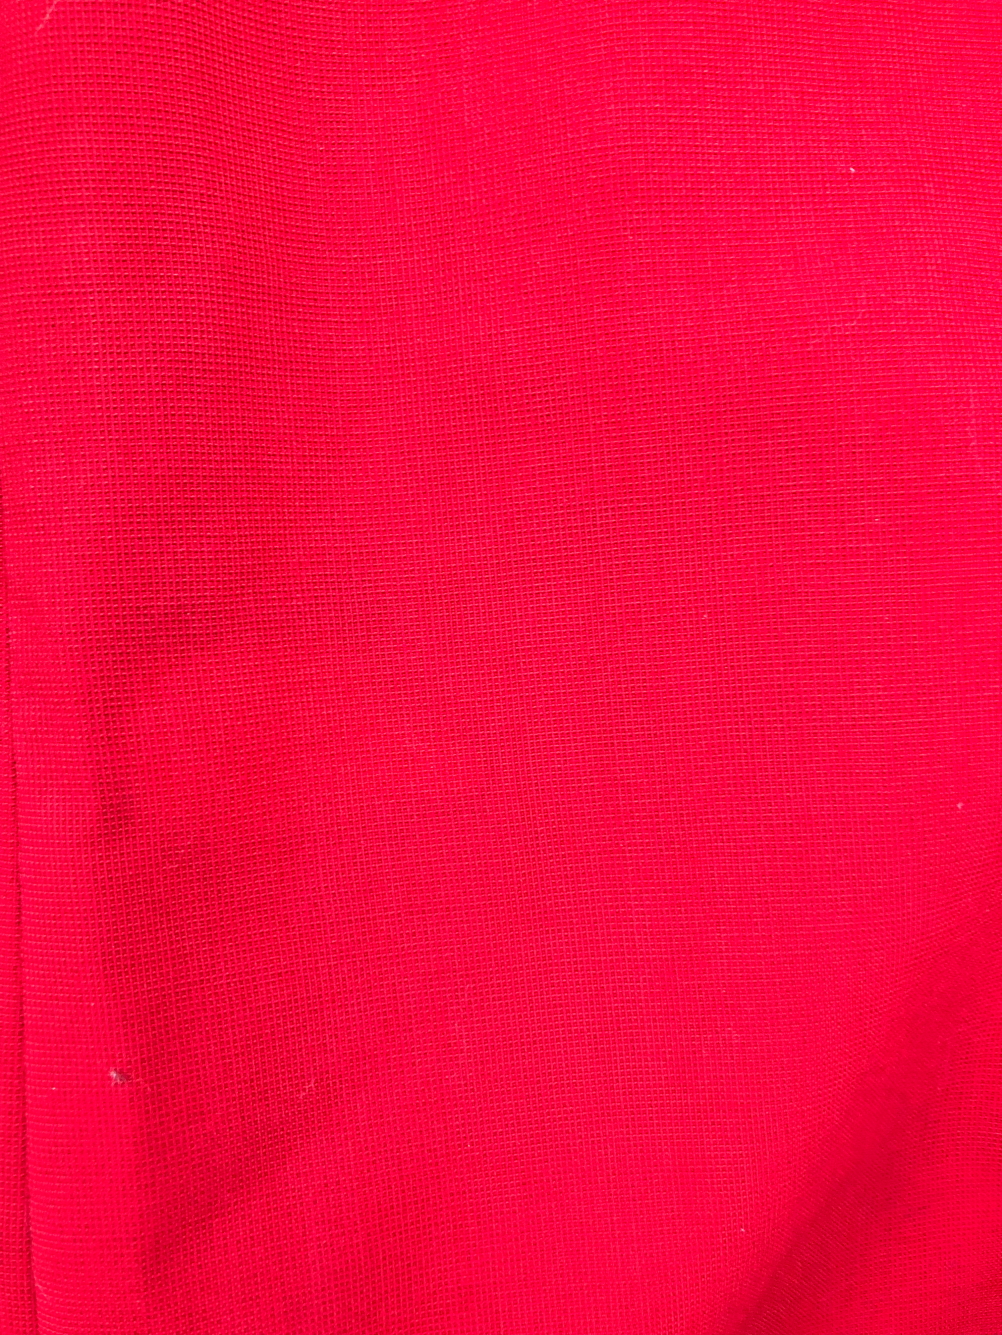 DRESS. YVES SAINT LAURENT CLASSIC RED SLIP DRESS. FRENCH SIZE 40, USA SIZE 8. LENGTH 102cm, PIT TO - Image 4 of 8